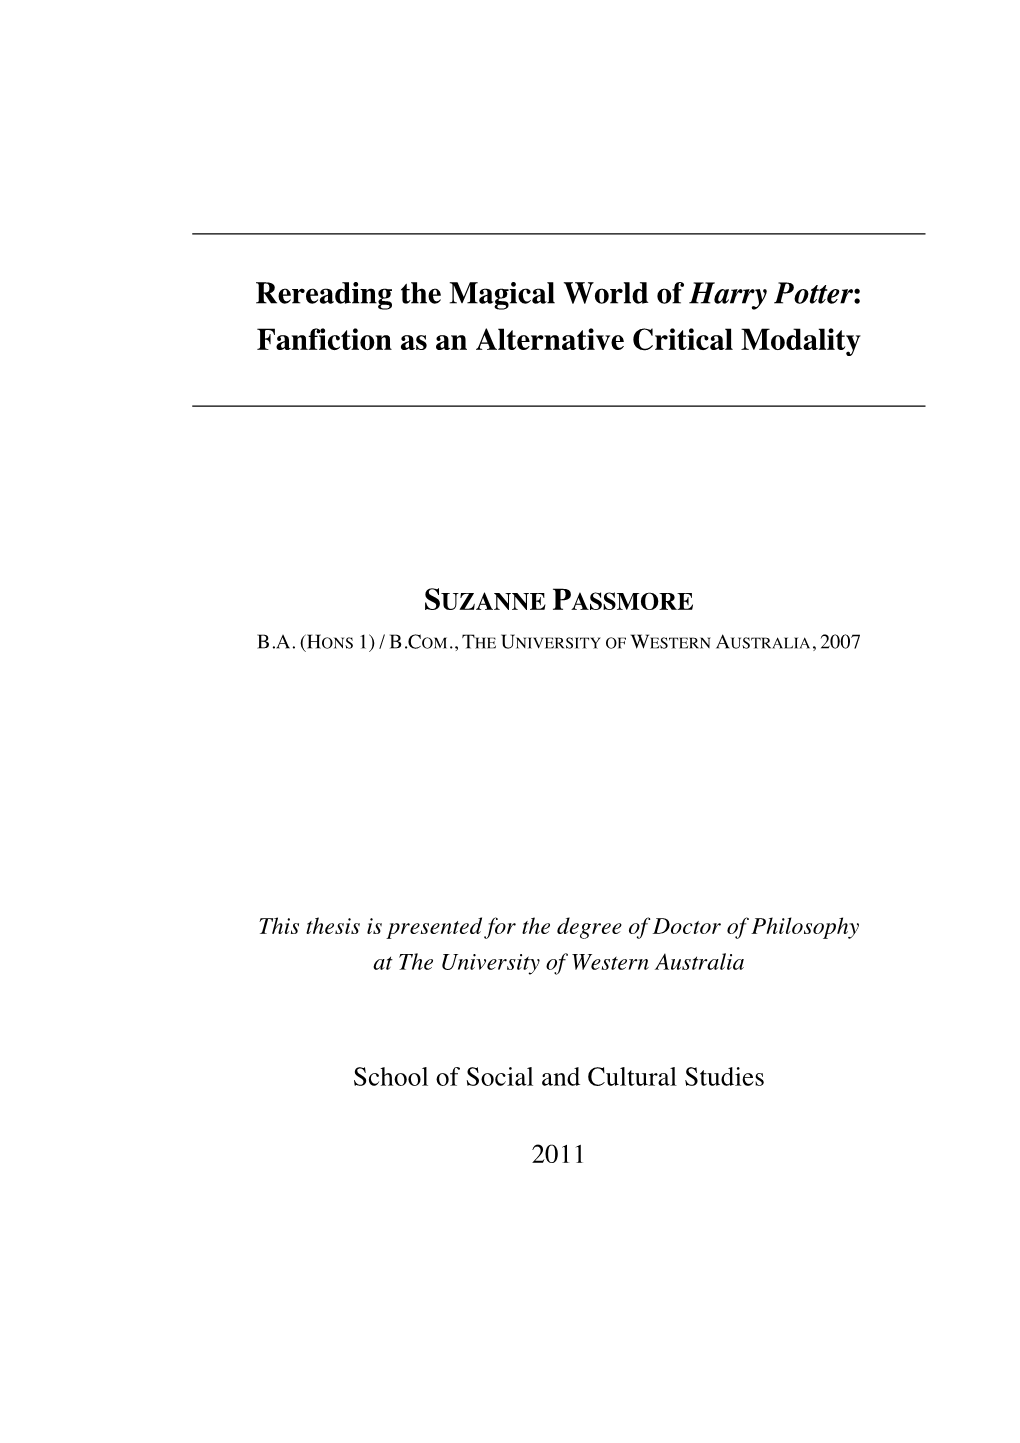 Rereading the Magical World of Harry Potter: Fanfiction As an Alternative Critical Modality